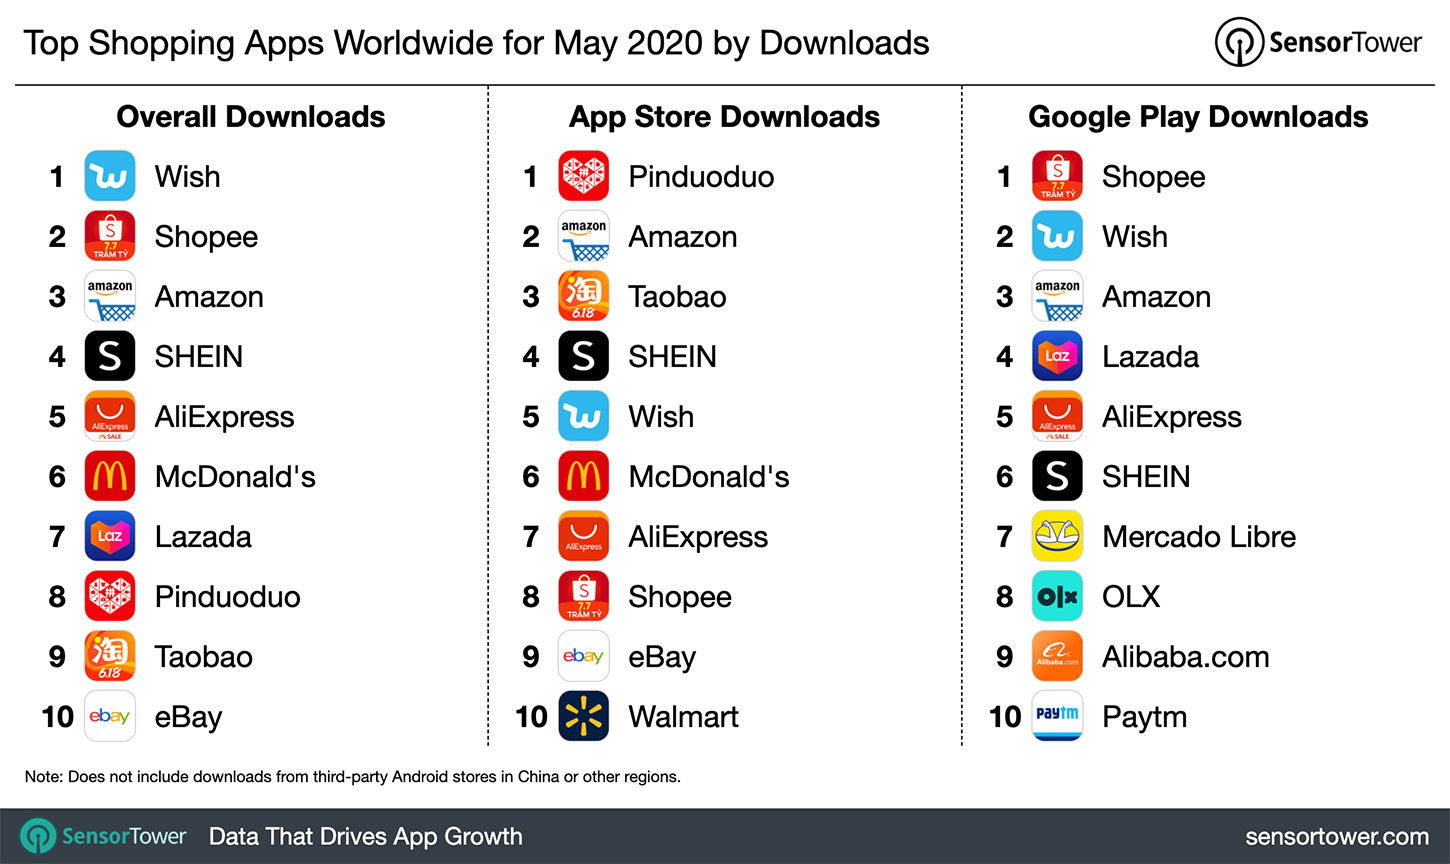 Top Shopping Category Apps Worldwide for May 2020 by Downloads